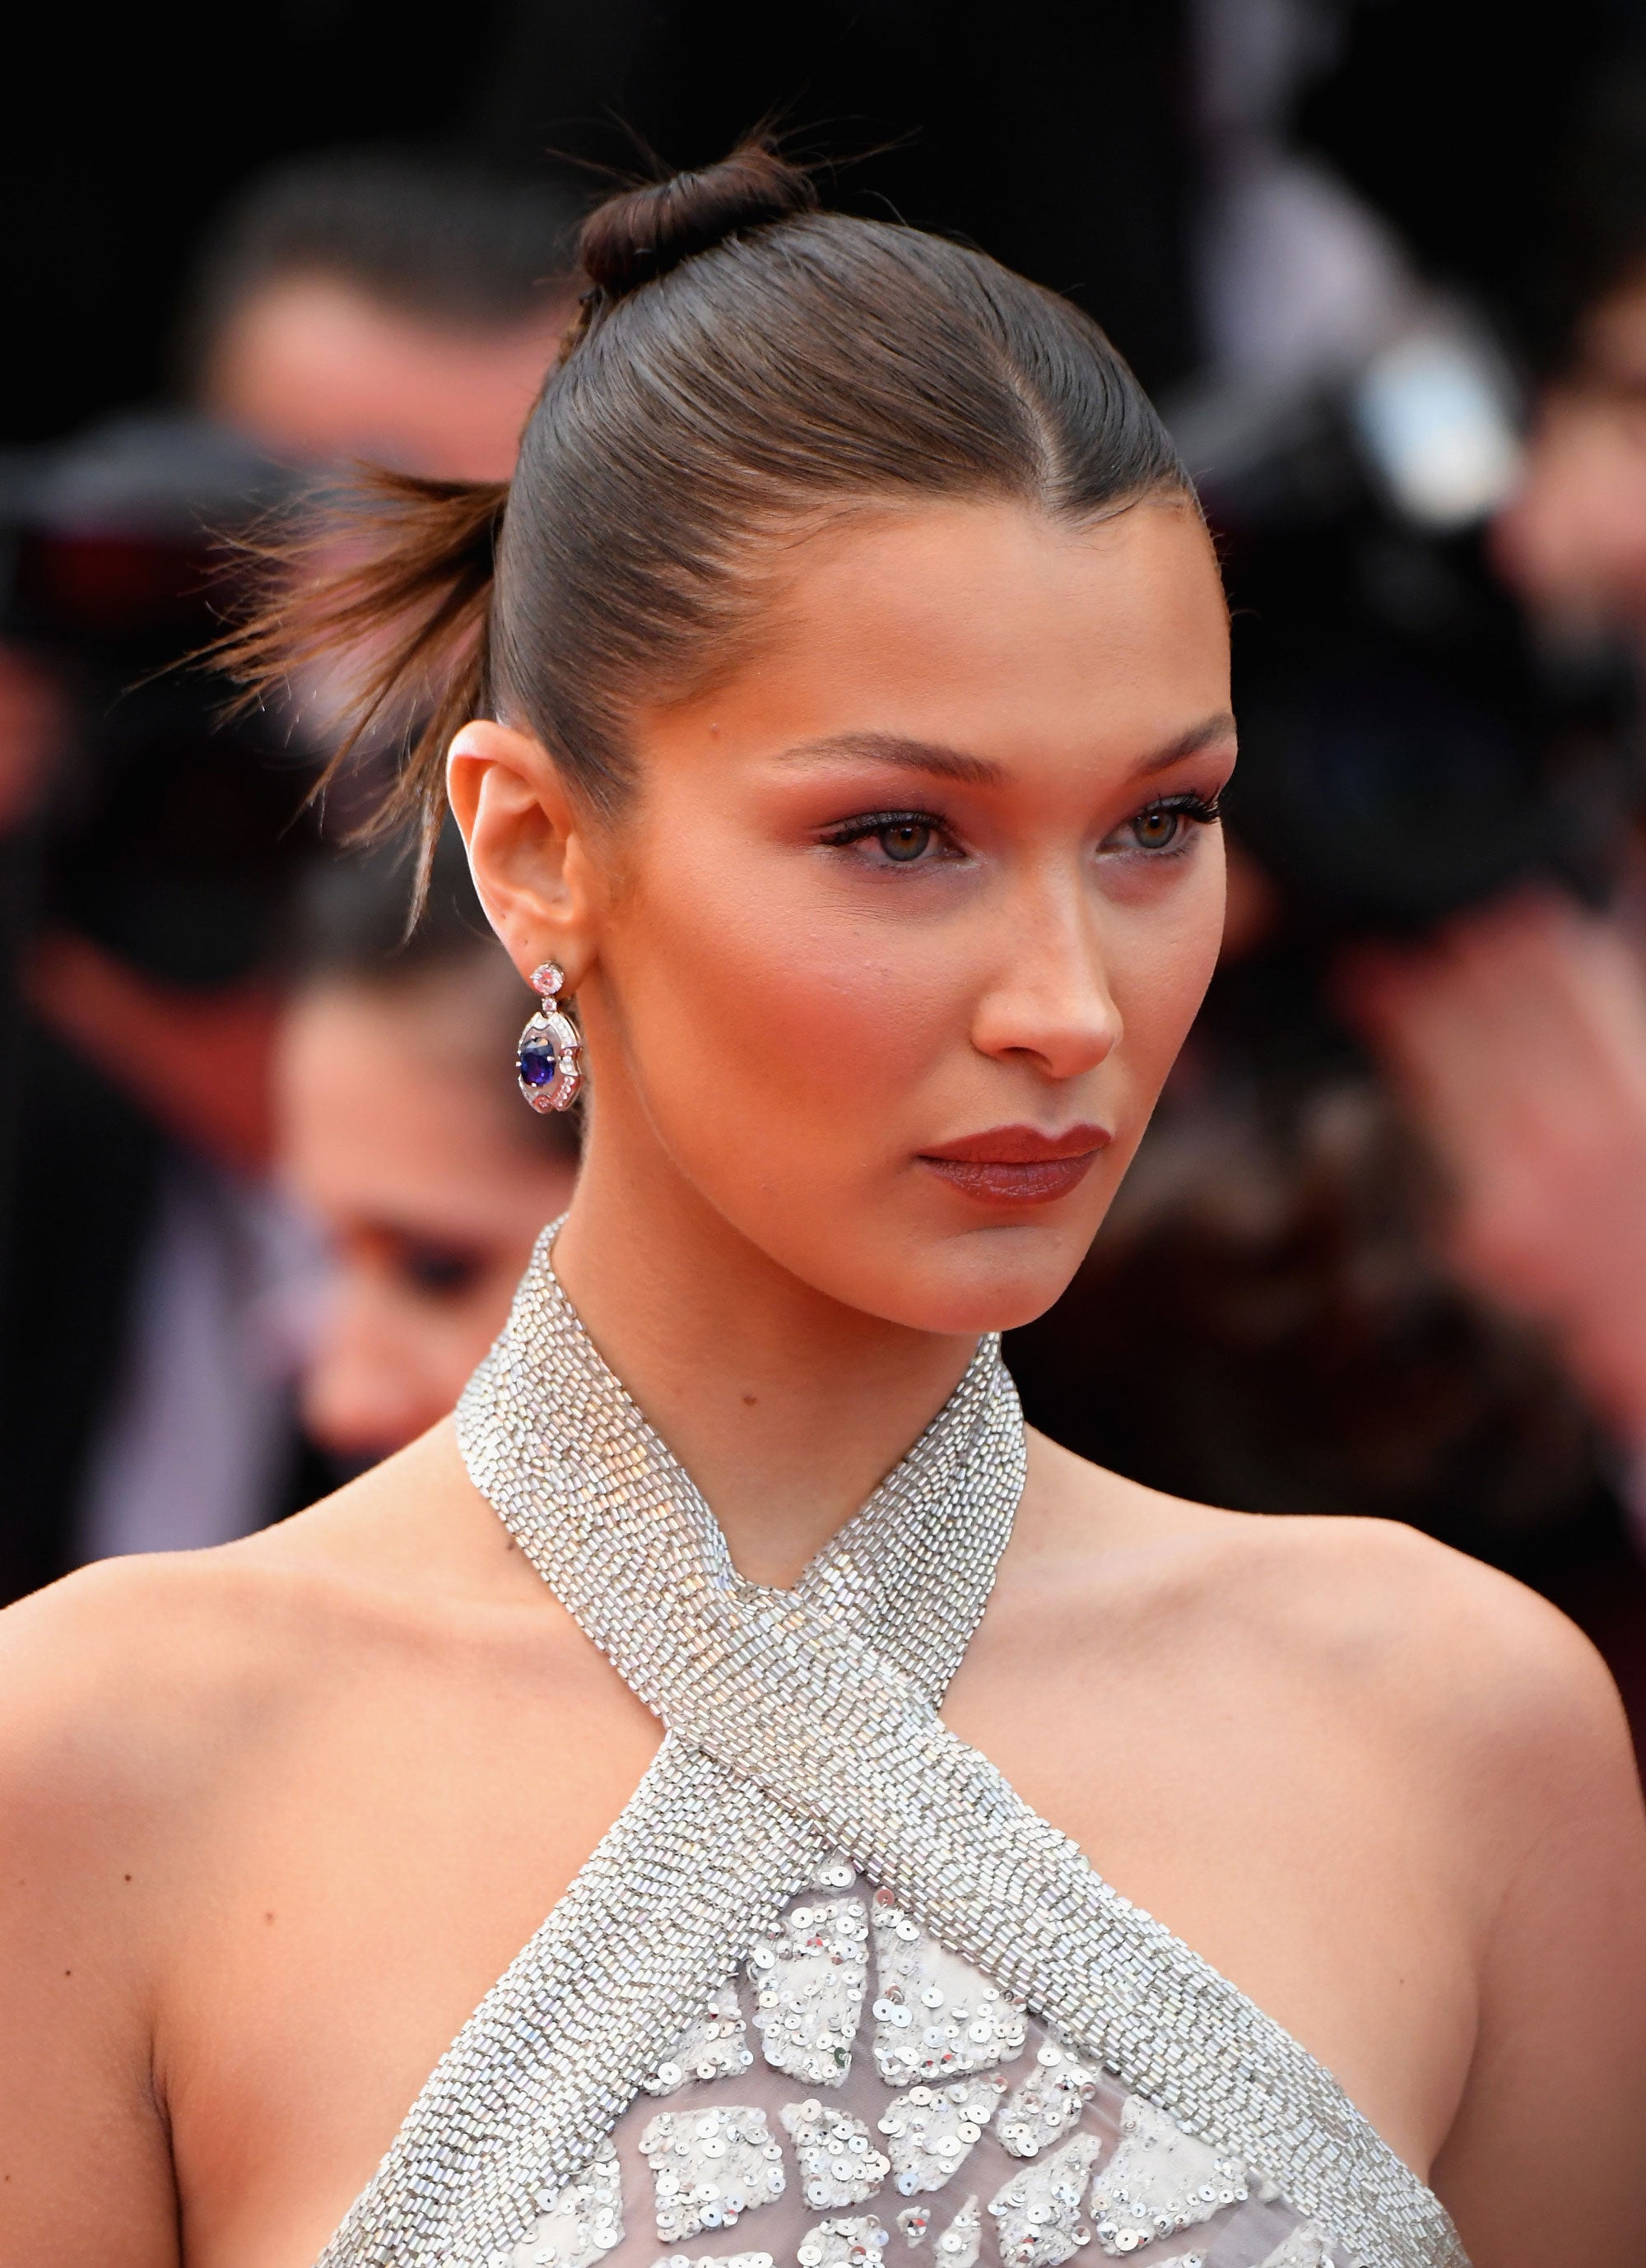 Slicked Back Hair Ideas You'll Love in 2021 – StayX